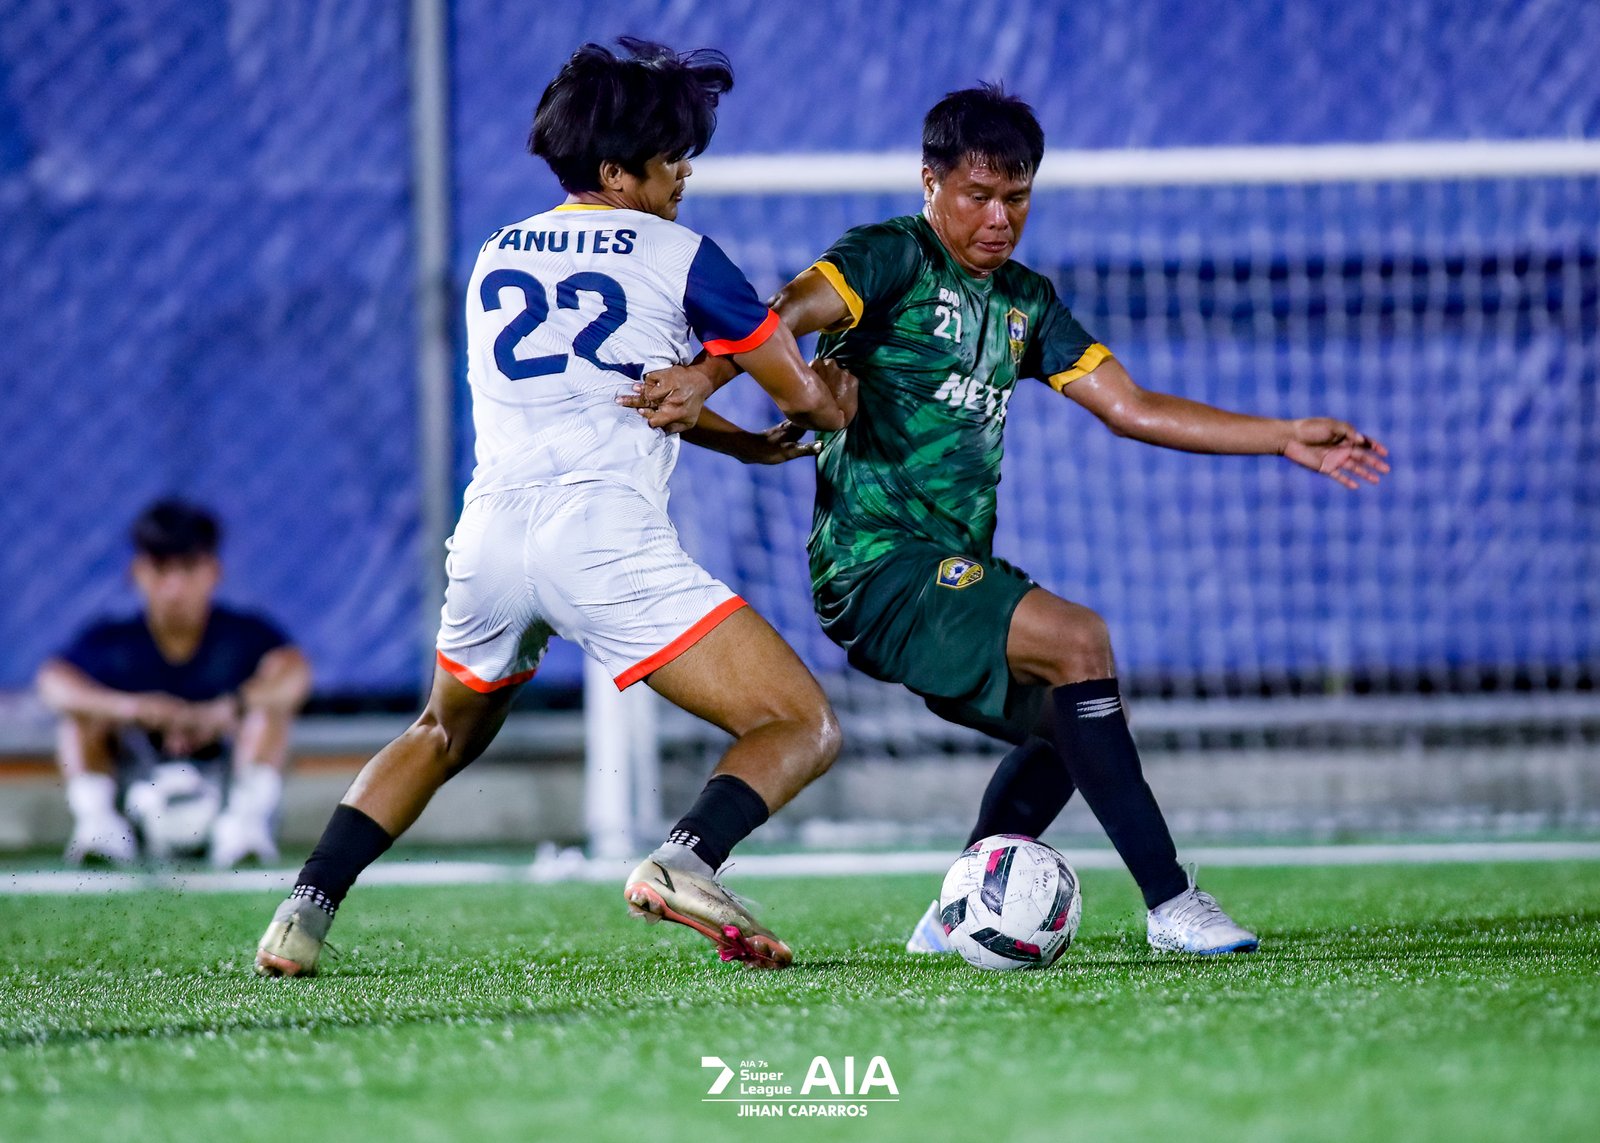 The QC Heroes stunned the Paranaque Nets, 3-1, in Week 11 action on Sunday, June 9 at the Bridgetowne Fields in Pasig City. [photo credit: AIA 7s]